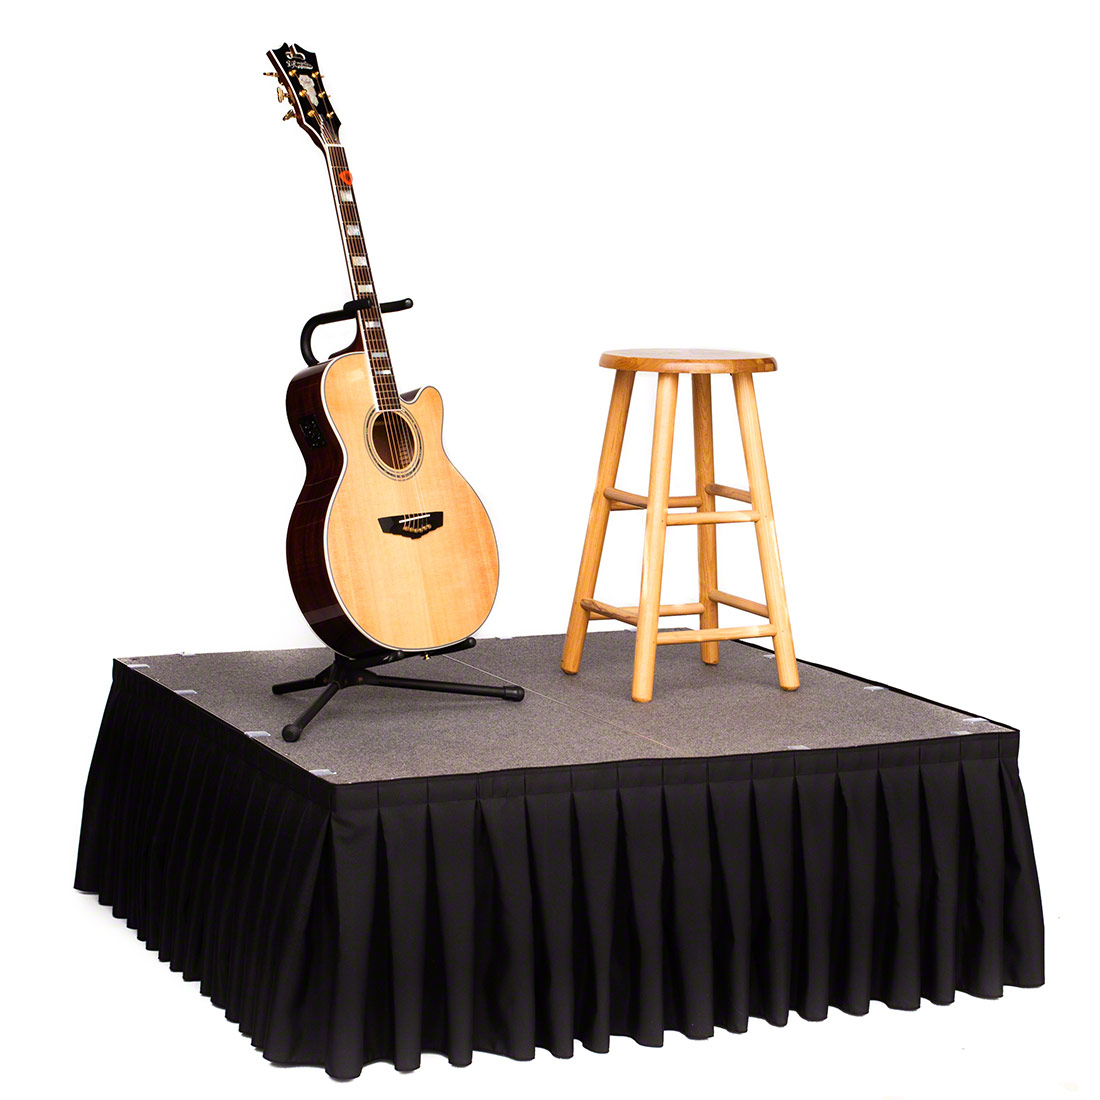 Lightweight 4x4 Folding Portable Stage Package Stagedrop